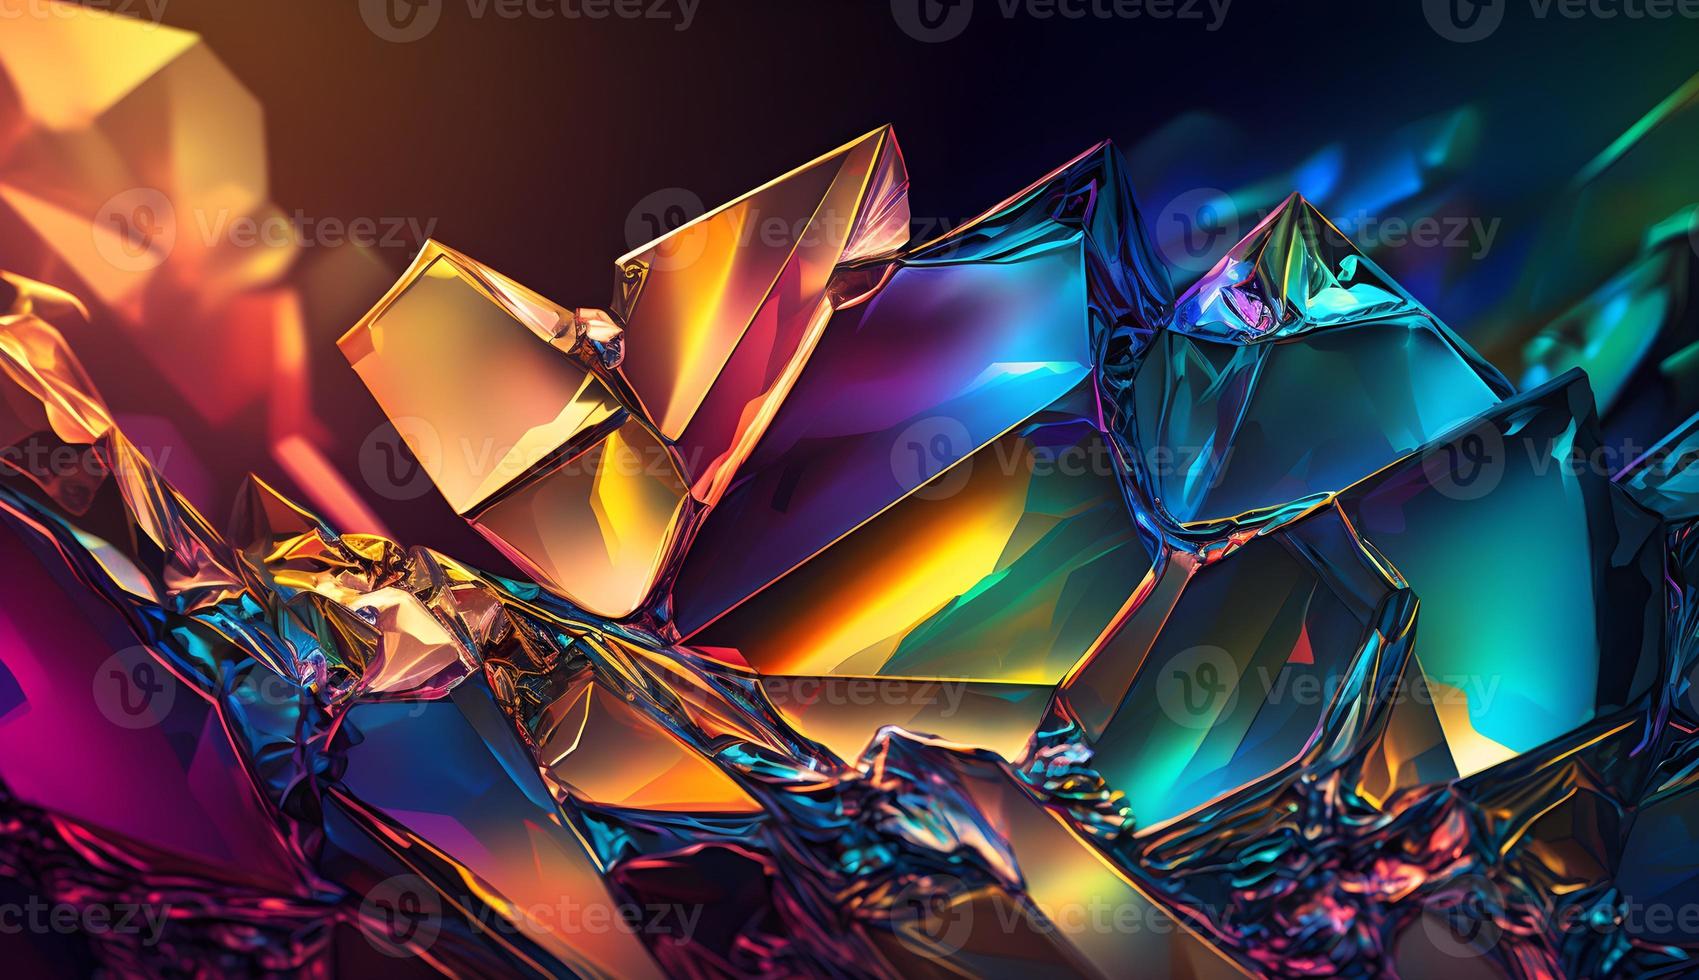 3D Holographic Iridescent Diamonds Background with Colorful glassy Gradient Material, Design Visual for Wallpaper, Banner, or Cover, 3d holographic crystals background. Pro Photo